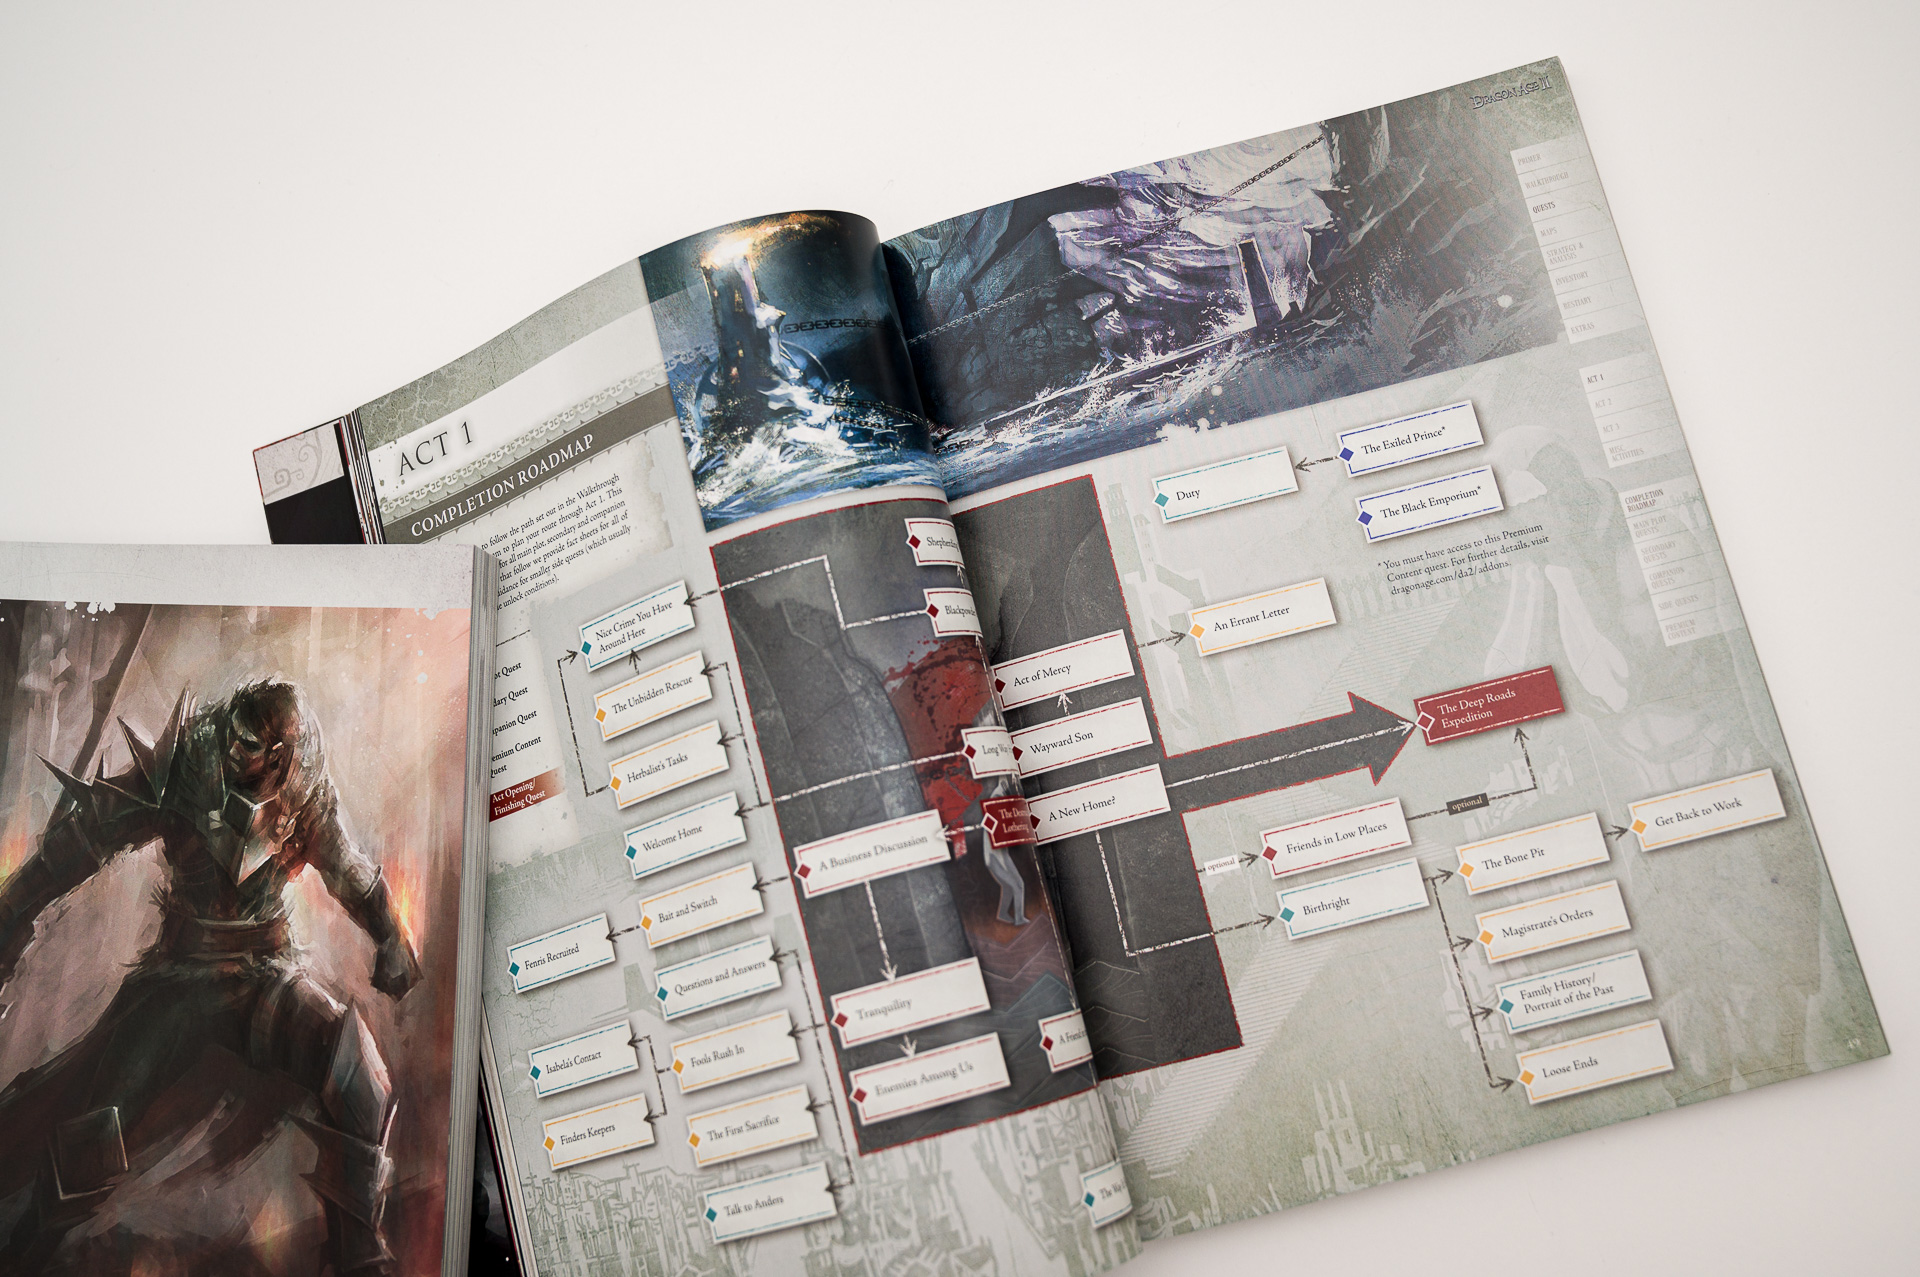 Dragon Age II: The Complete Official Guide by Piggyback